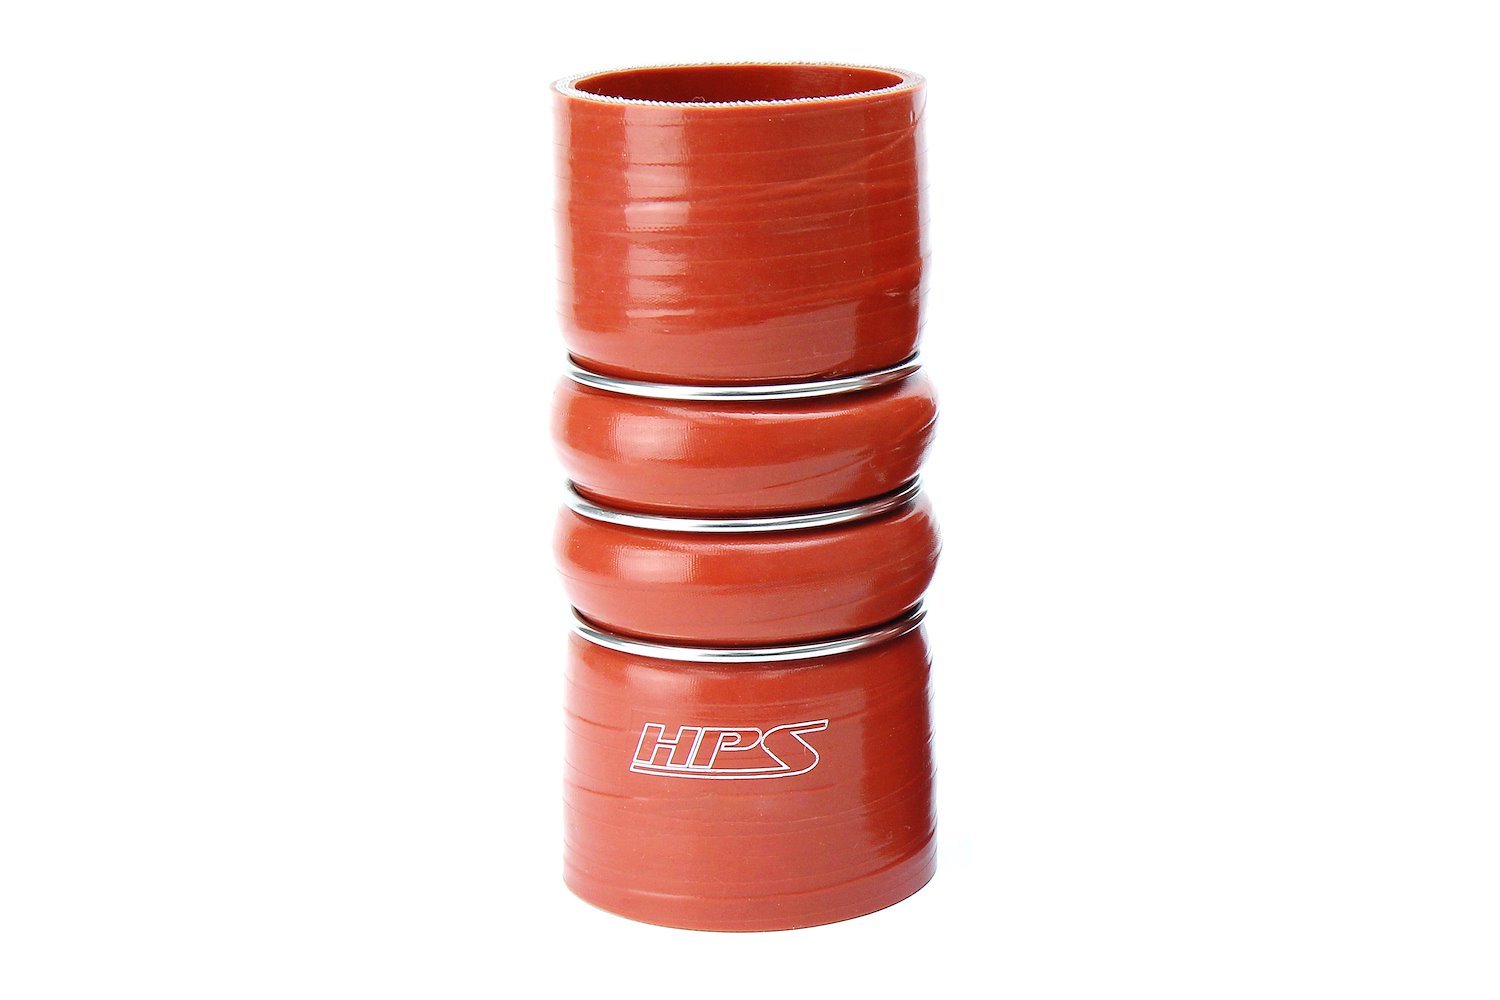 CAC-500-HOT Silicone CAC Hose, Silicone CAC Hump Hose Hot, High-Temp 4-Ply Aramid Reinforced, 5 in. ID, 6 in. Long